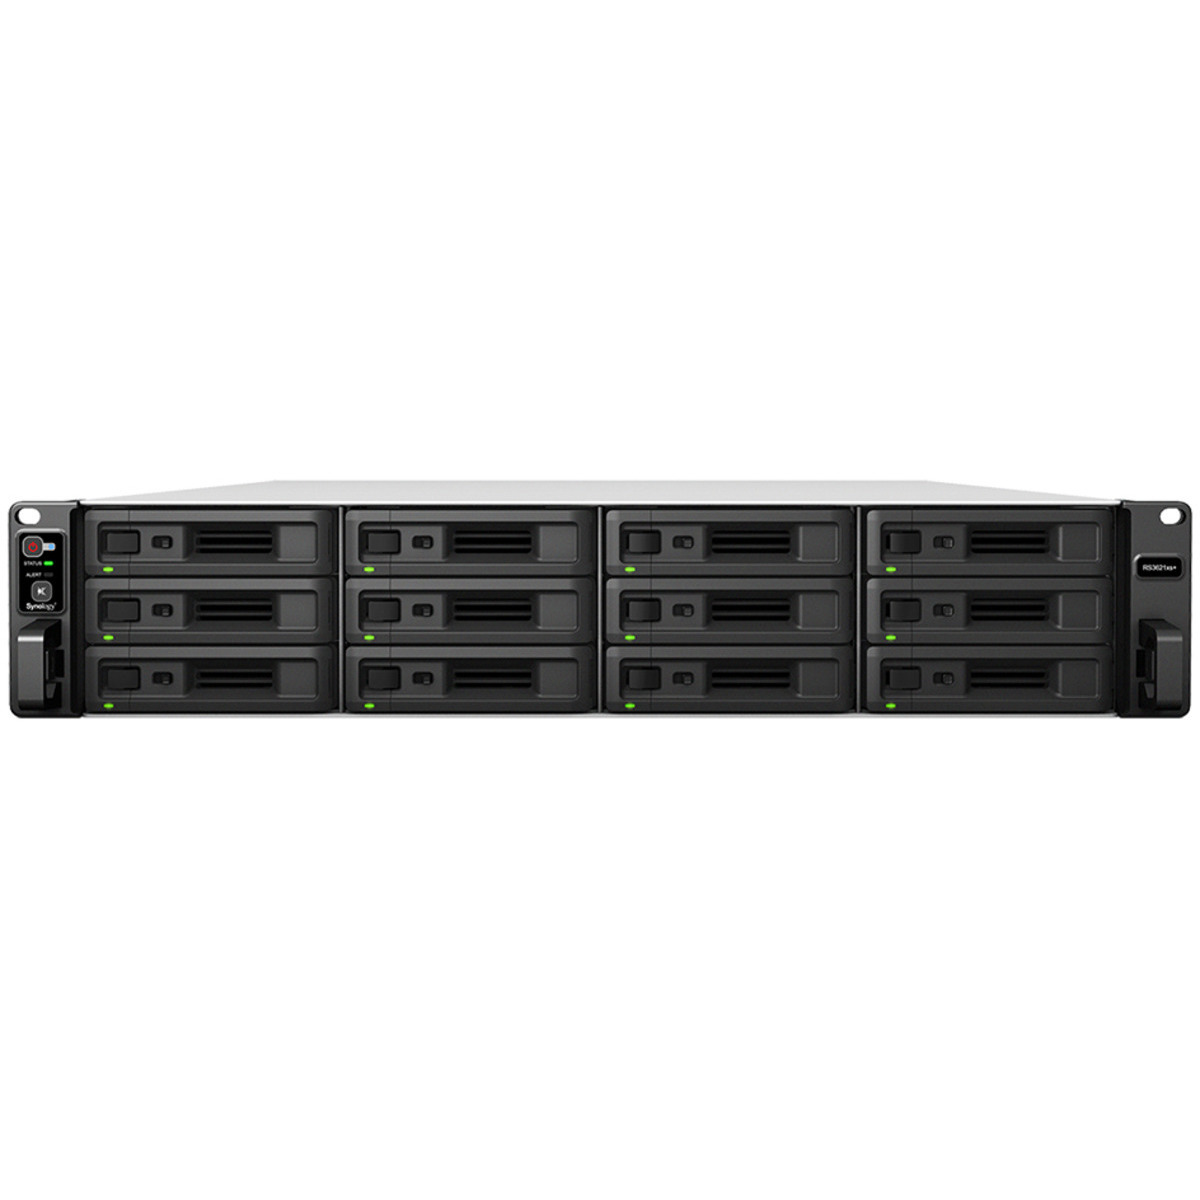 Synology RackStation RS3621xs+ 160tb 12-Bay RackMount Large Business / Enterprise NAS - Network Attached Storage Device 10x16tb Seagate EXOS X18 ST16000NM000J 3.5 7200rpm SATA 6Gb/s HDD ENTERPRISE Class Drives Installed - Burn-In Tested RackStation RS3621xs+